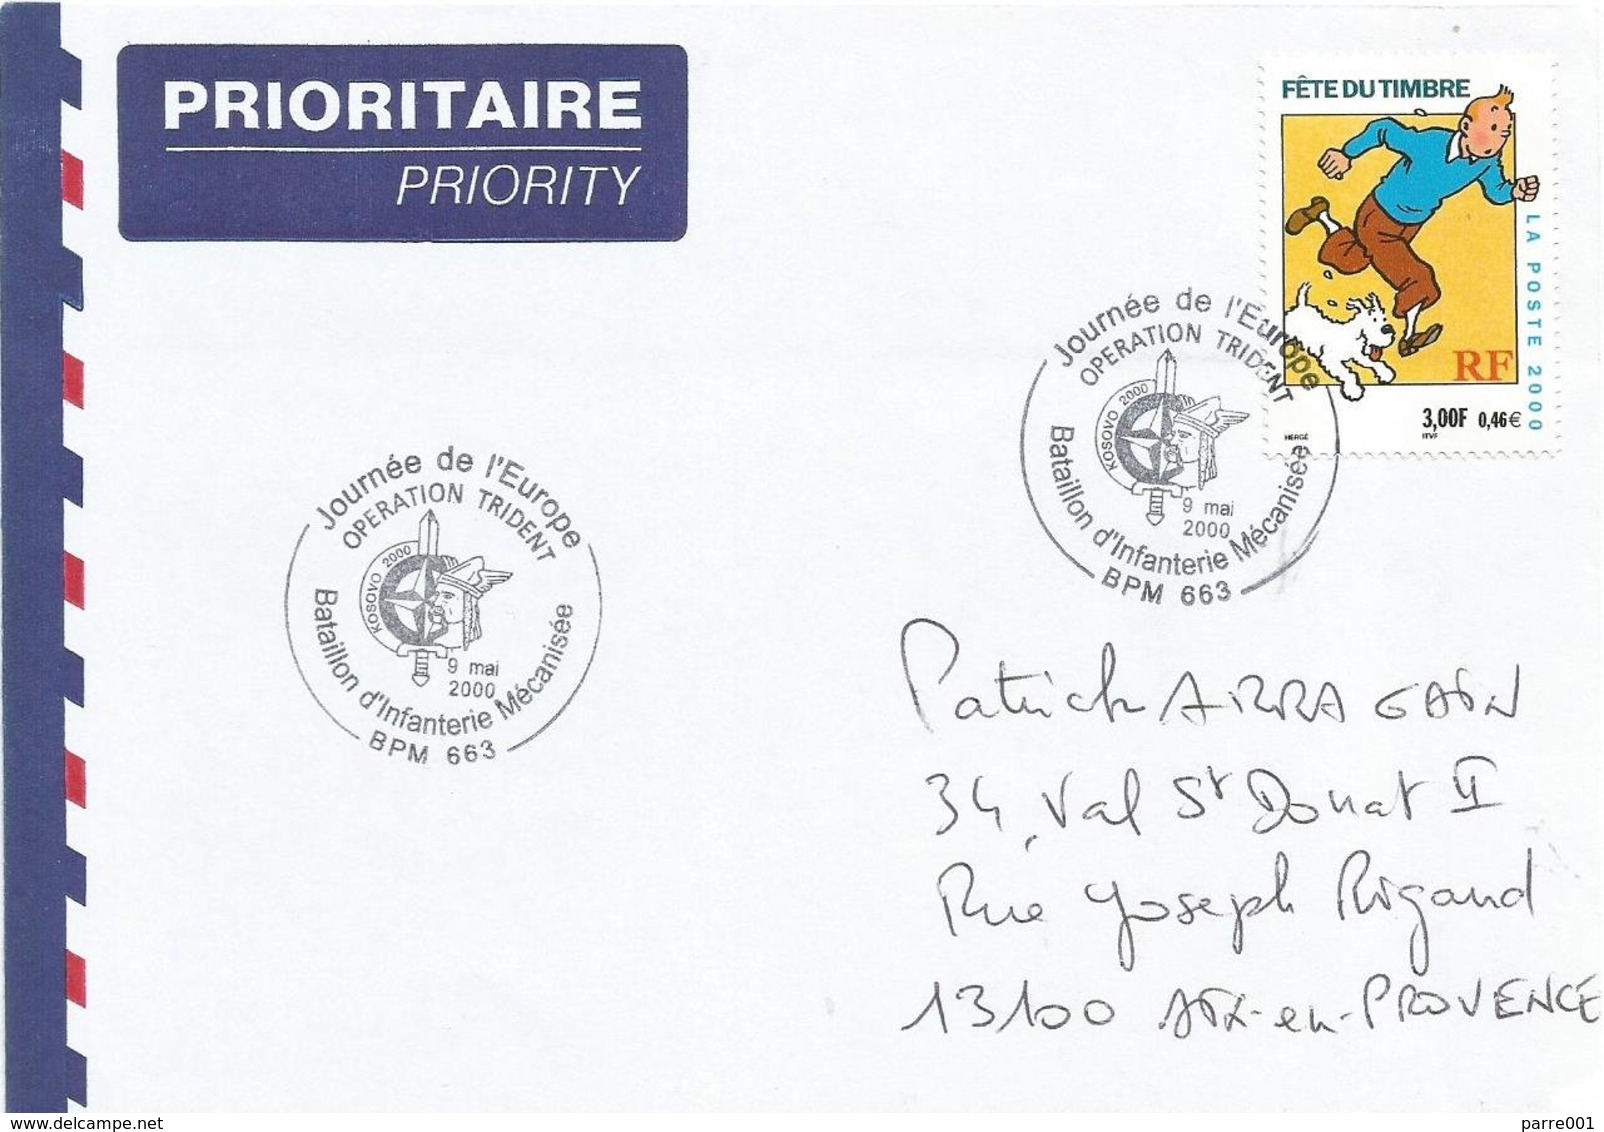 BPM 663 2000 KFOR Mitrovica Kosovo Operation Trident Military Peacekeeping Special Handstamp Tintin Cover - Militaria